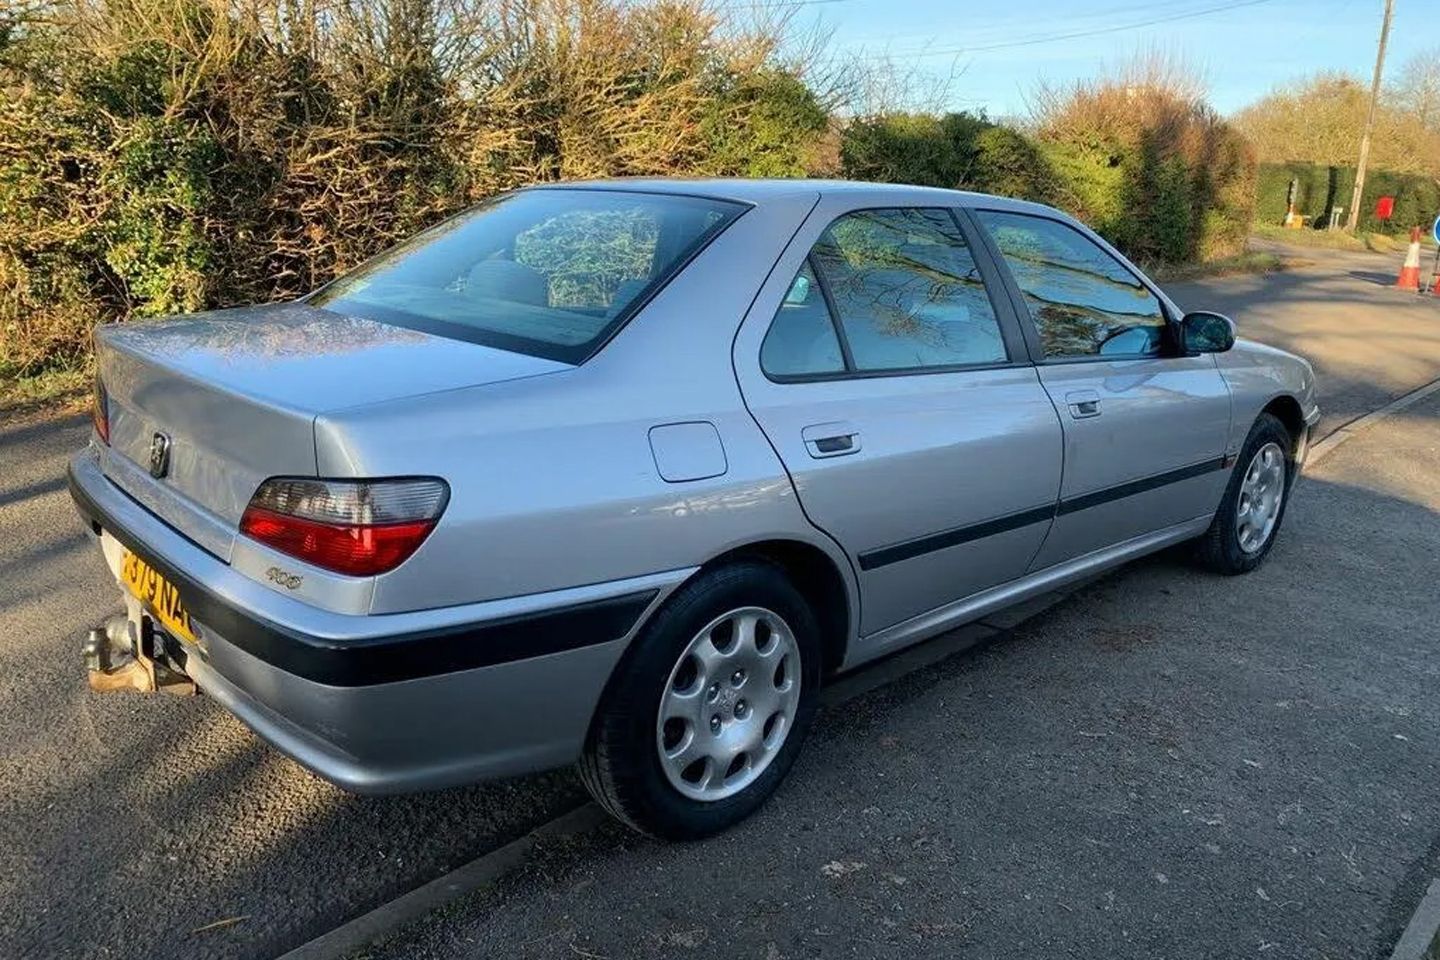 The sad story of the Peugeot 406 